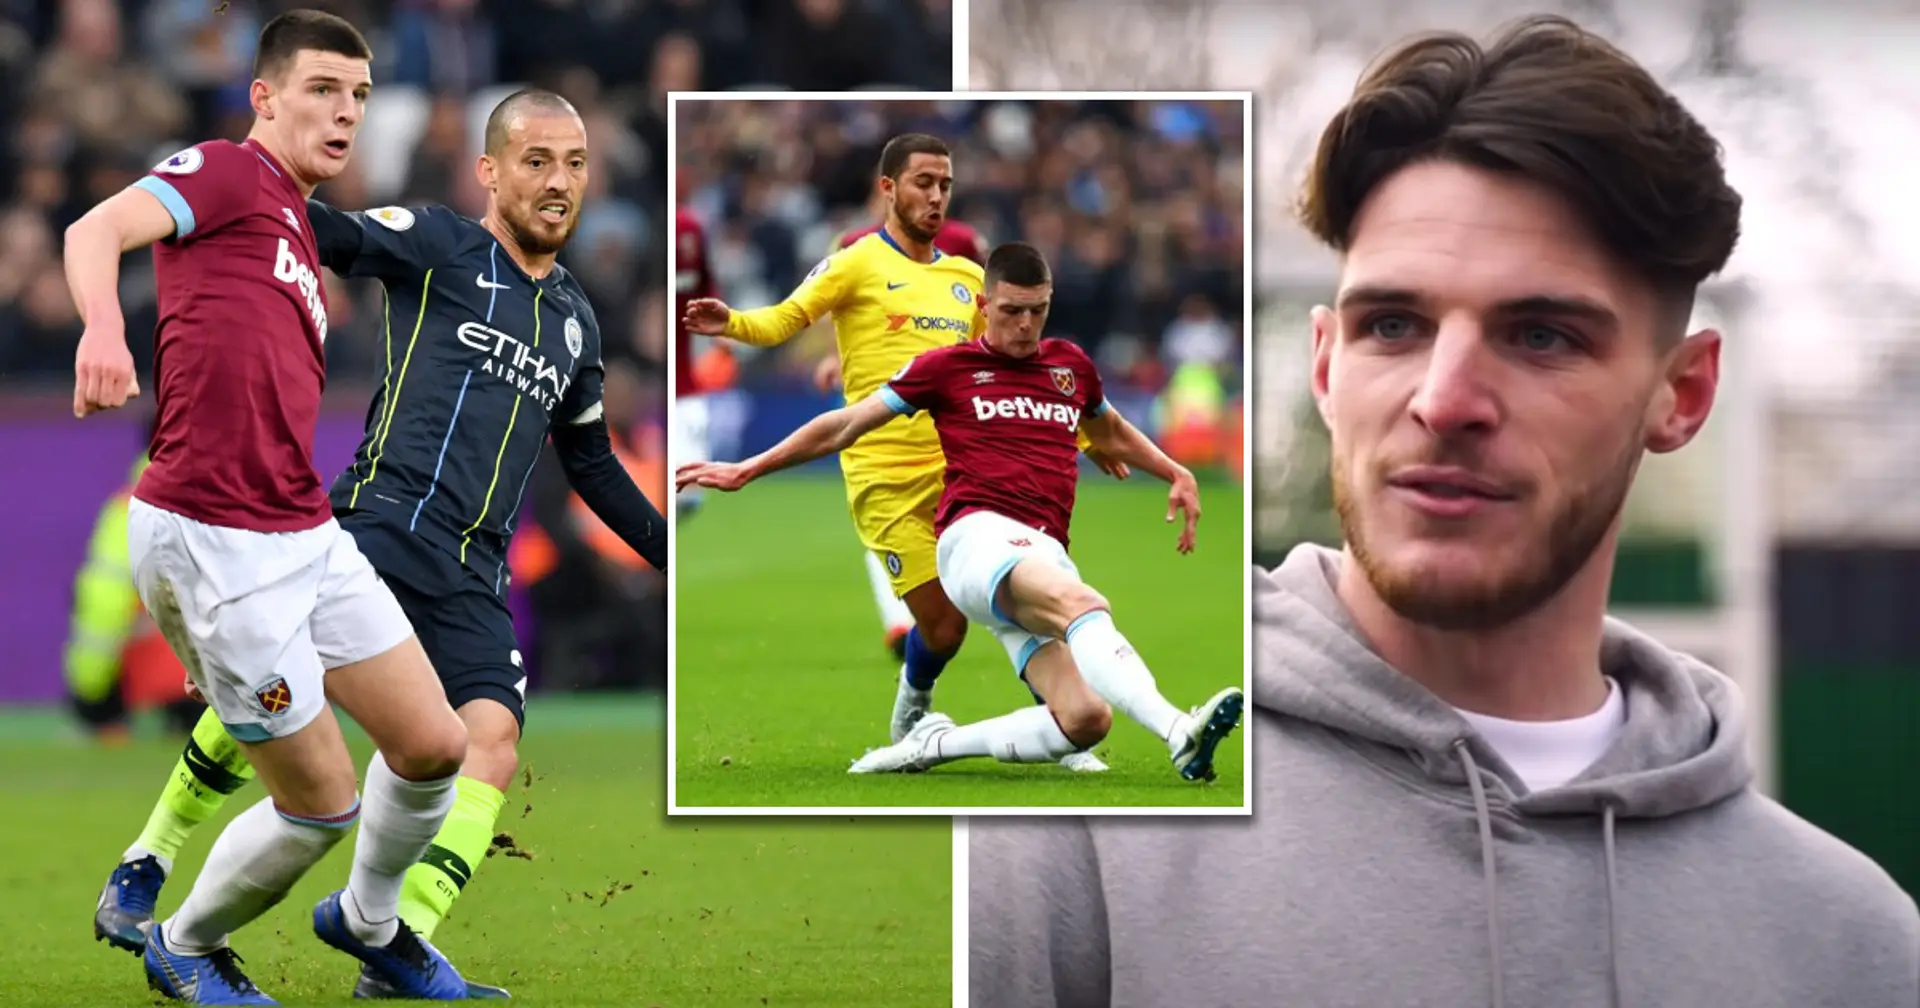 ‘He’s just so silky’: Declan Rice names Liverpool player as his toughest opponent